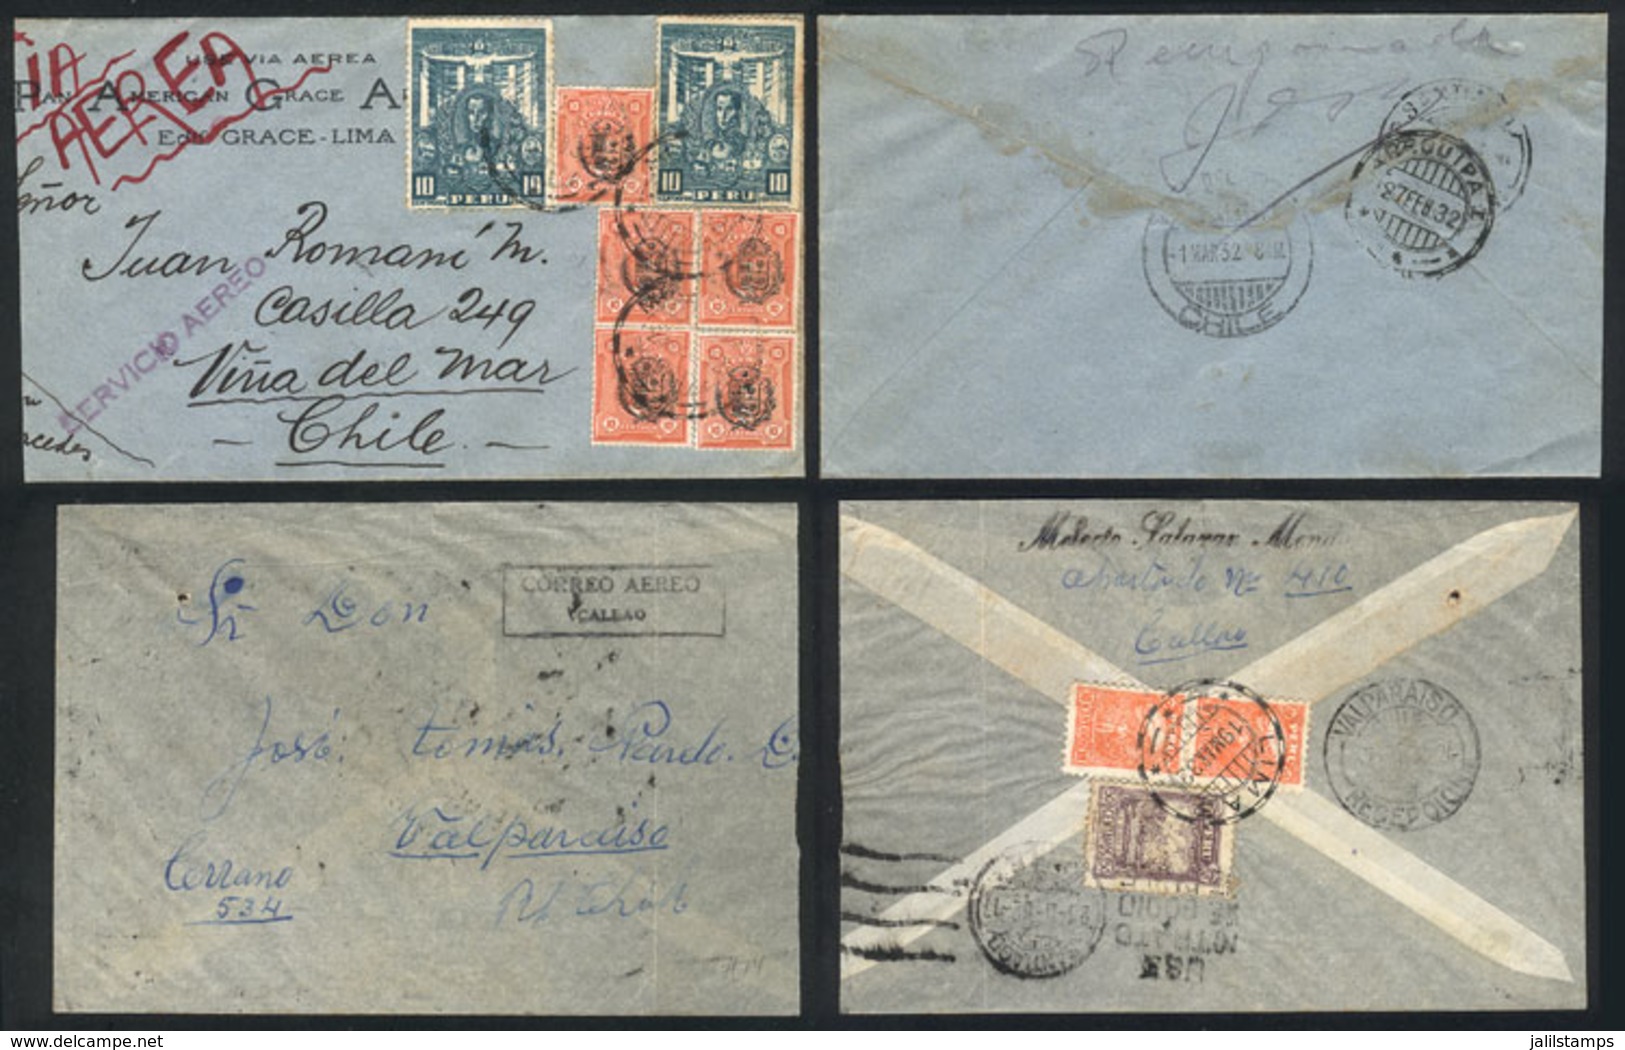 PERU: 27/FE And 19/MAR/1932 Arequipa - Viña Del Mar And Callao - Valparaiso, 2 Airmail Covers Franked With New Rate Of 7 - Peru